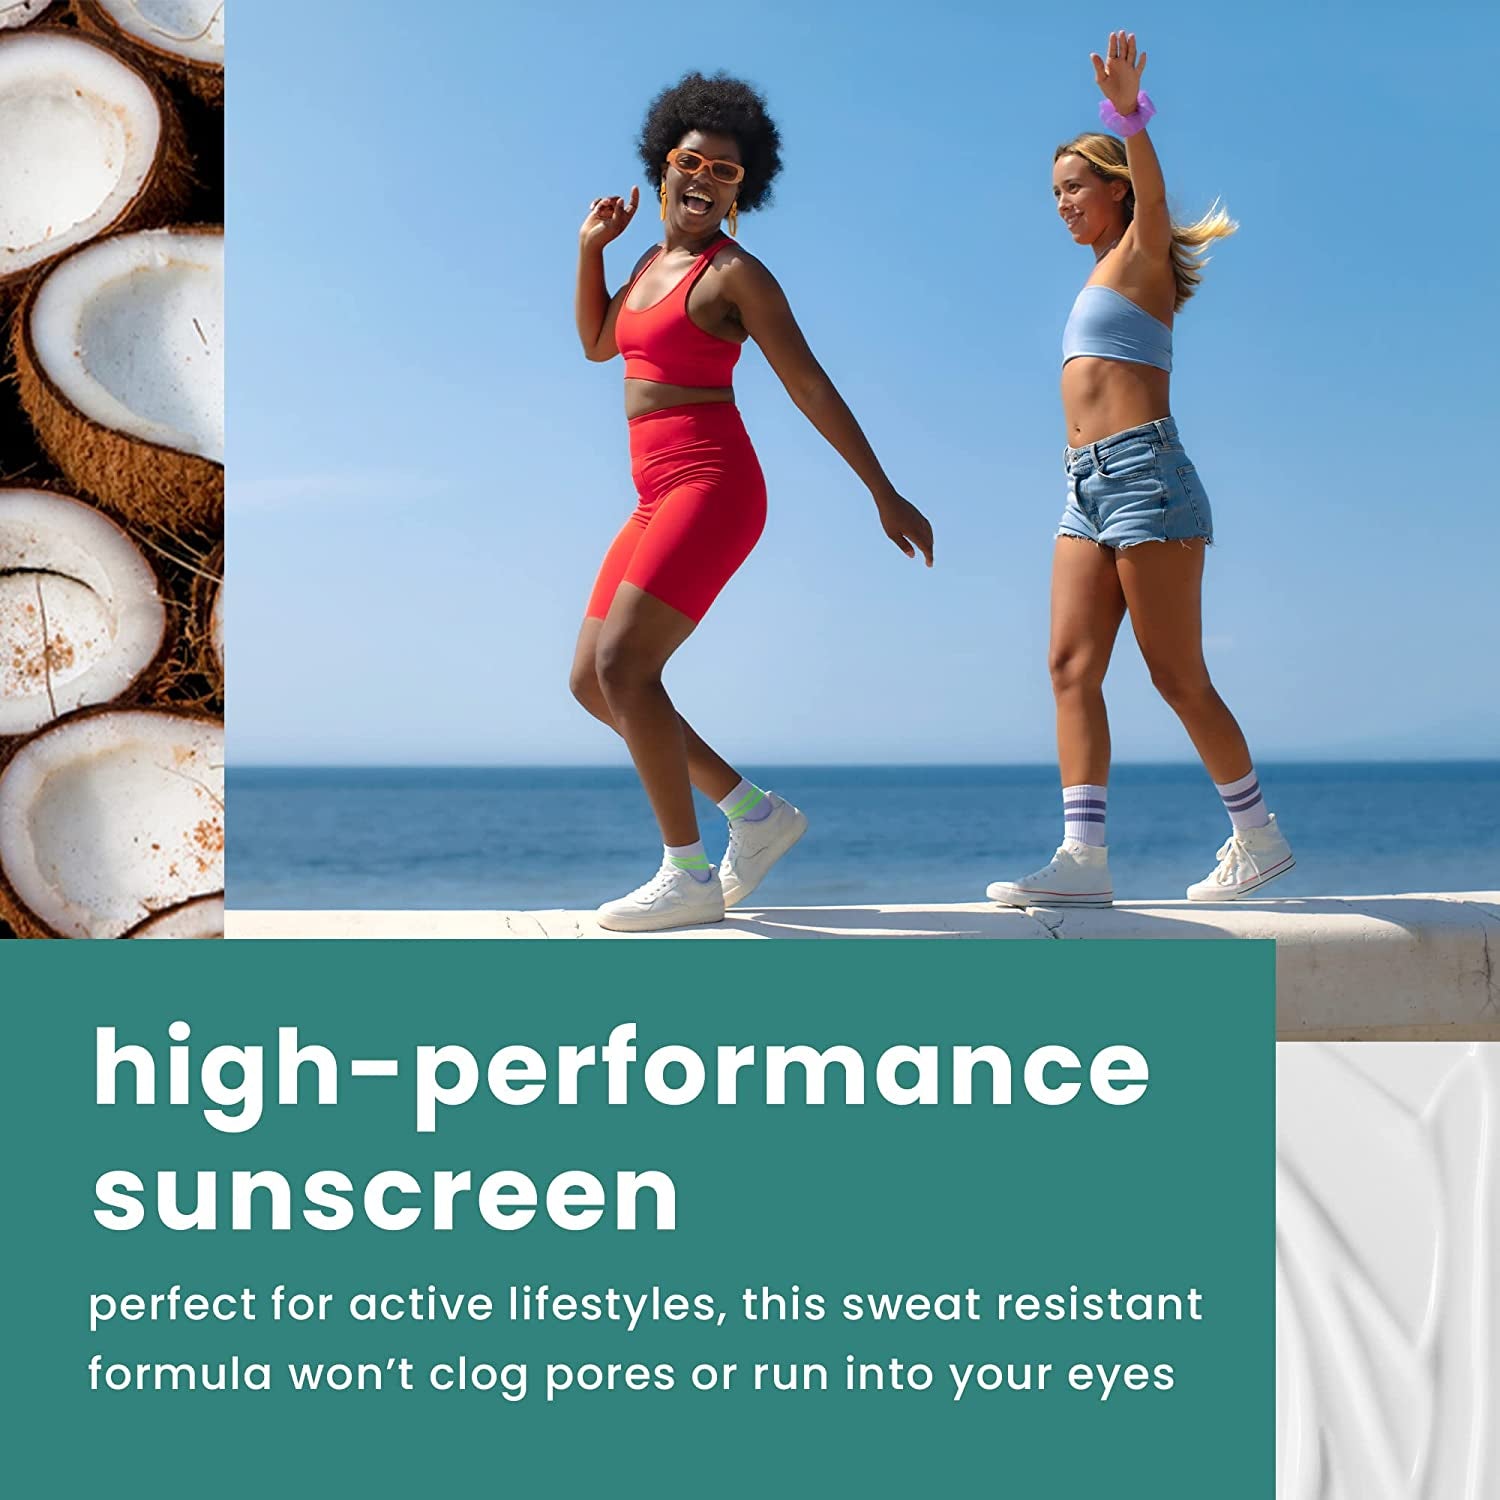 "Sun-Kissed Protection: Hawaiian Tropic SPF 30 Everyday Active Lotion Sunscreen Twin Pack"